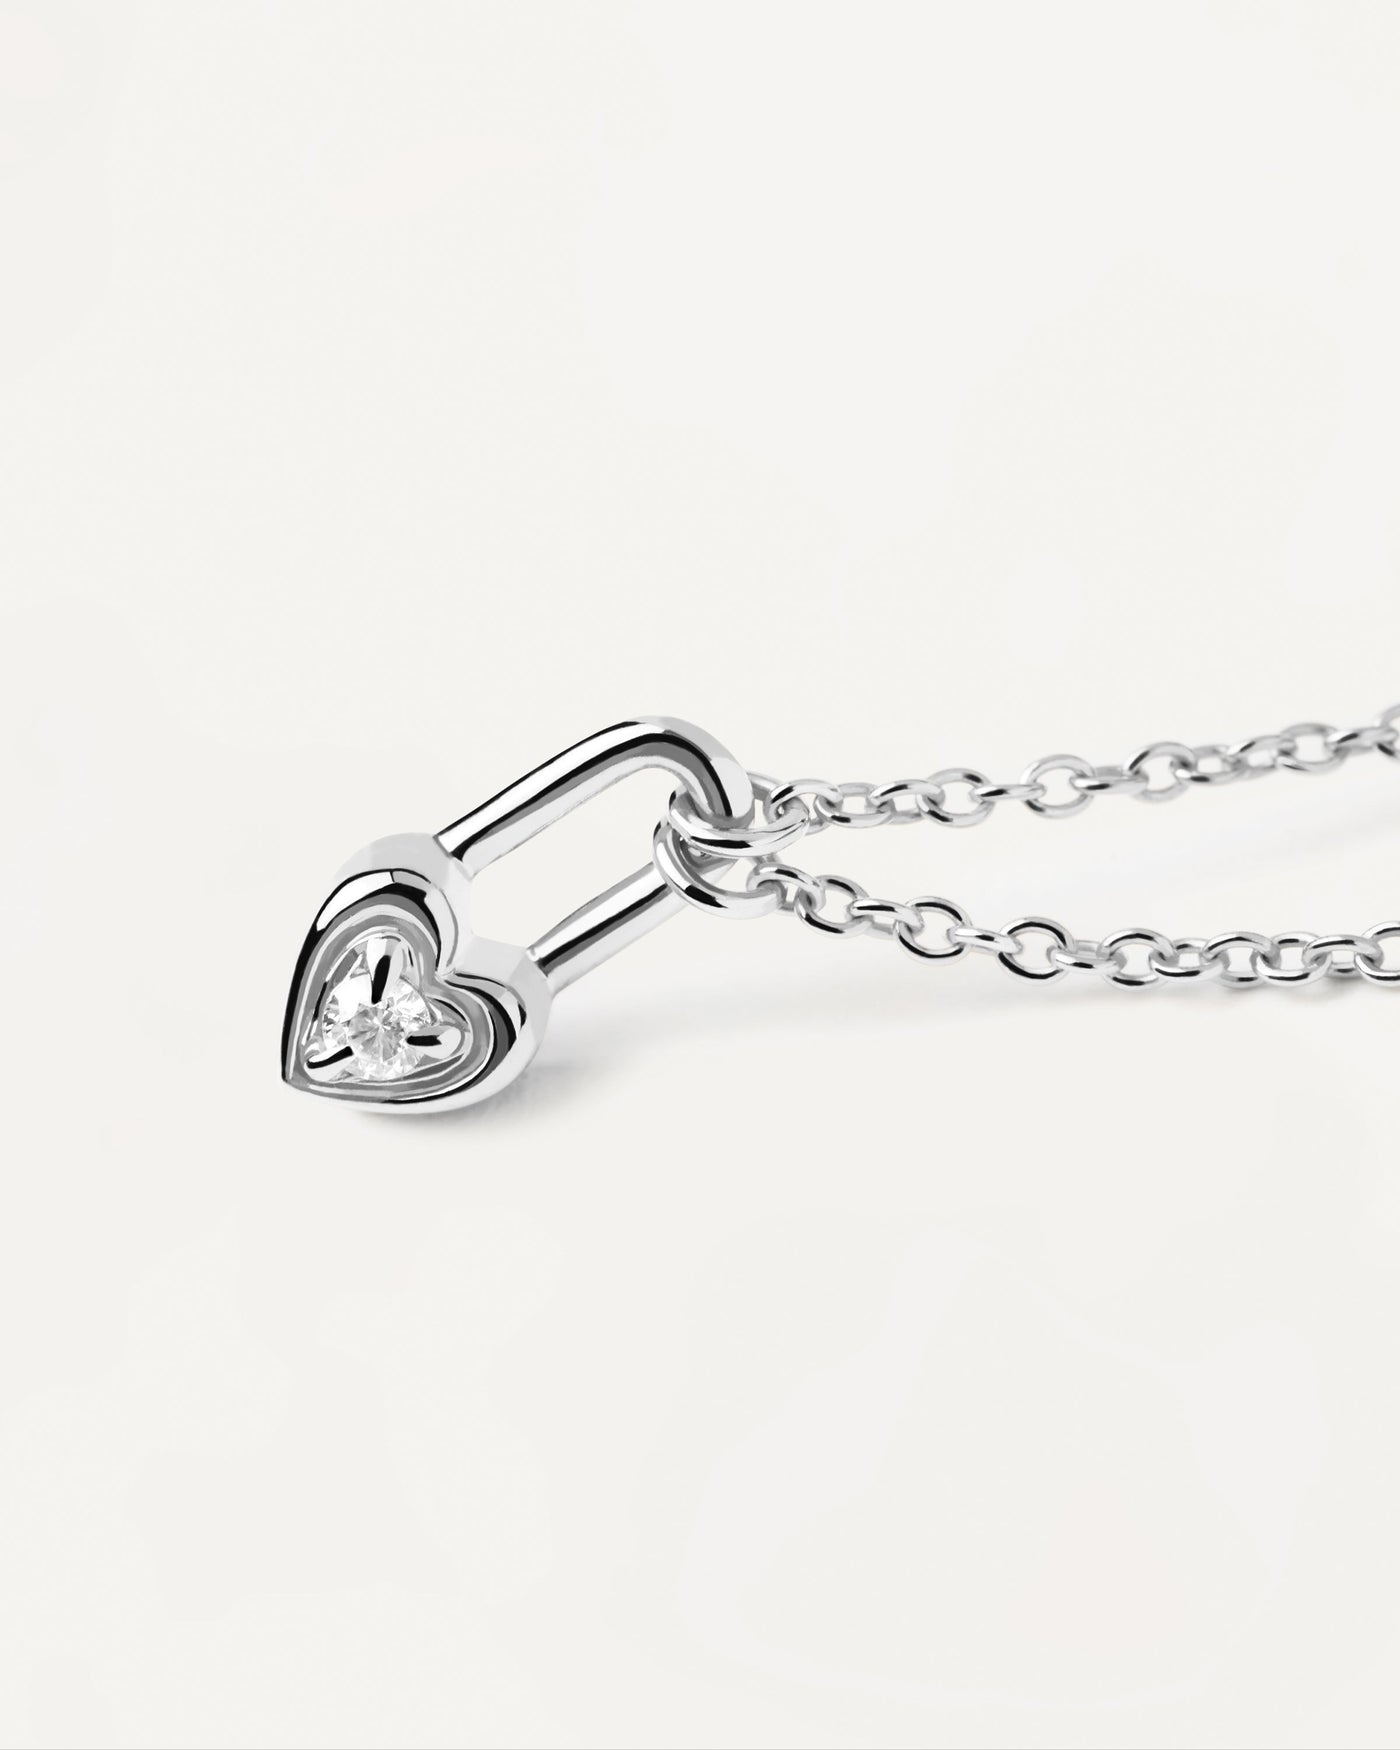 2023 Selection | Heart Padlock Silver Necklace. Silver necklace with heart padlock pendant set with white zirconia. Get the latest arrival from PDPAOLA. Place your order safely and get this Best Seller. Free Shipping.